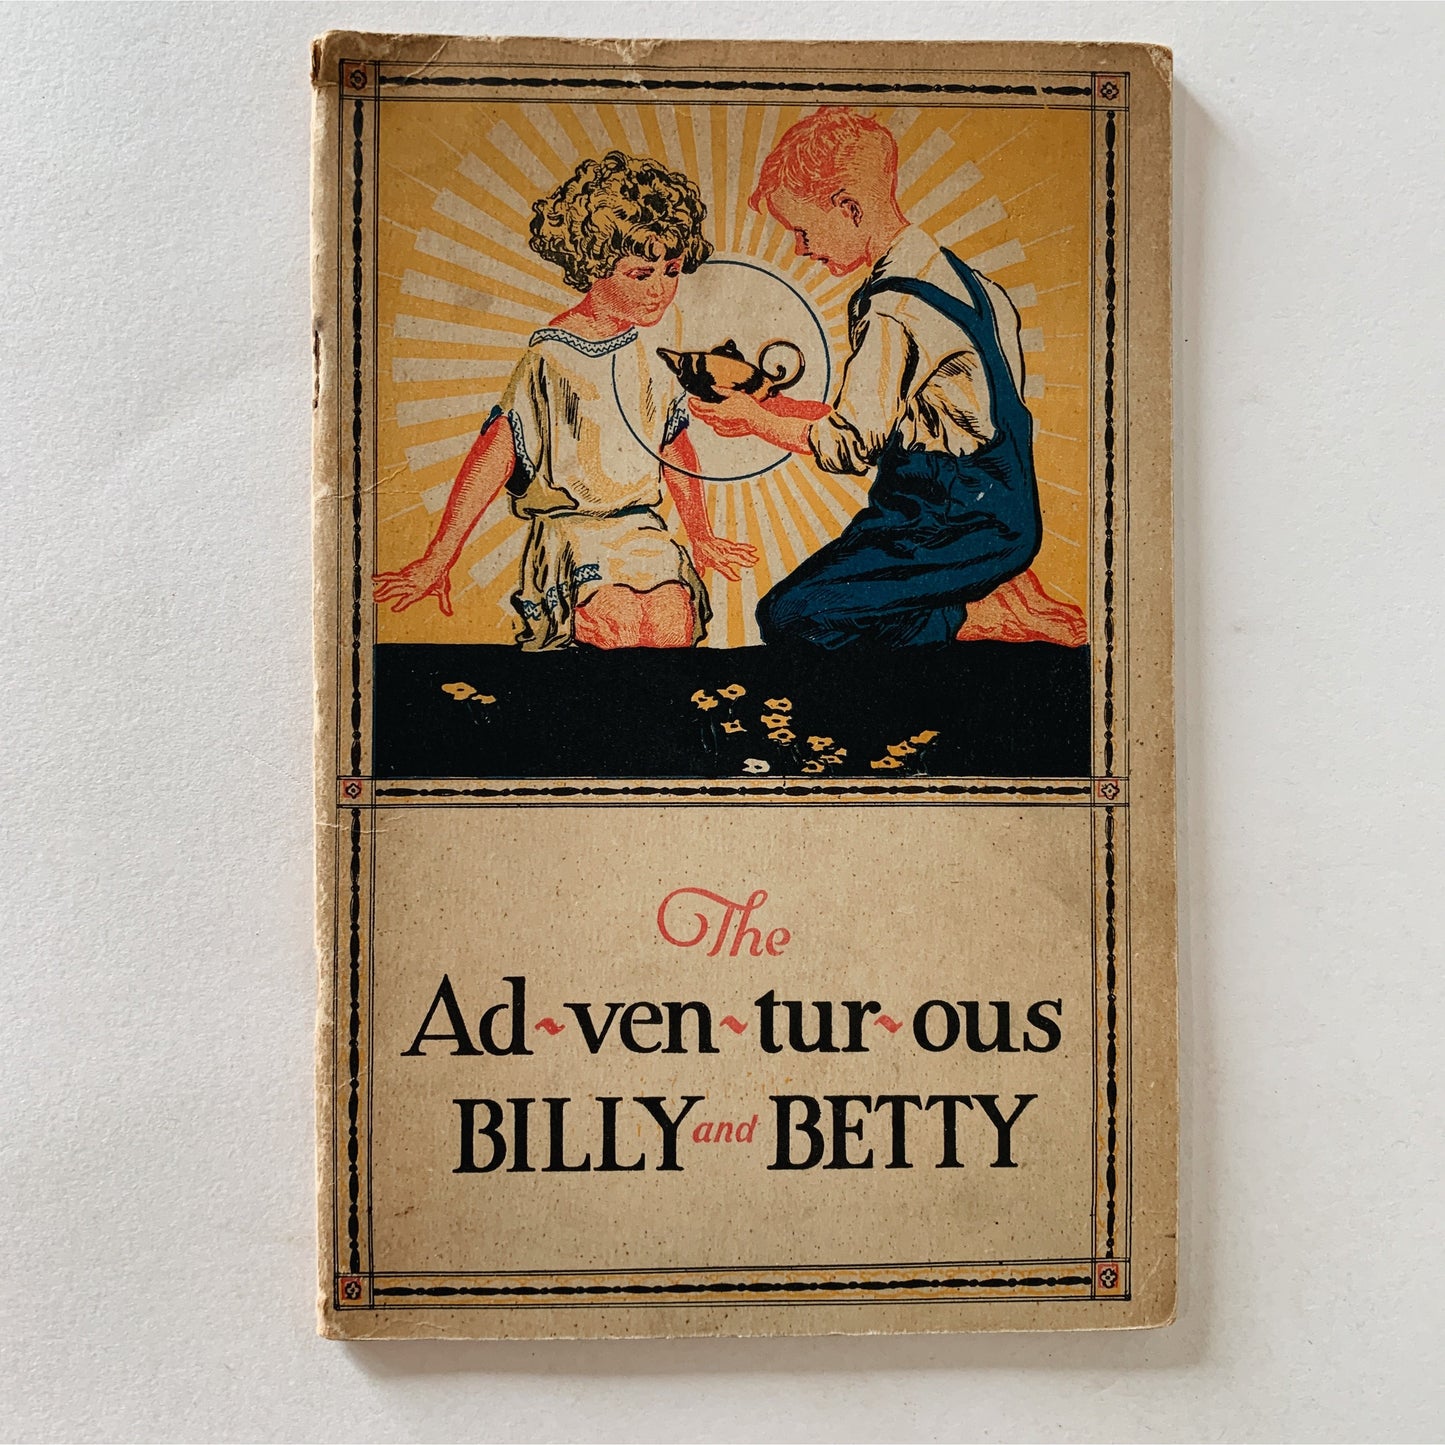 The Adventures of Billy and Betty, 1923 Van Camp's Story Book